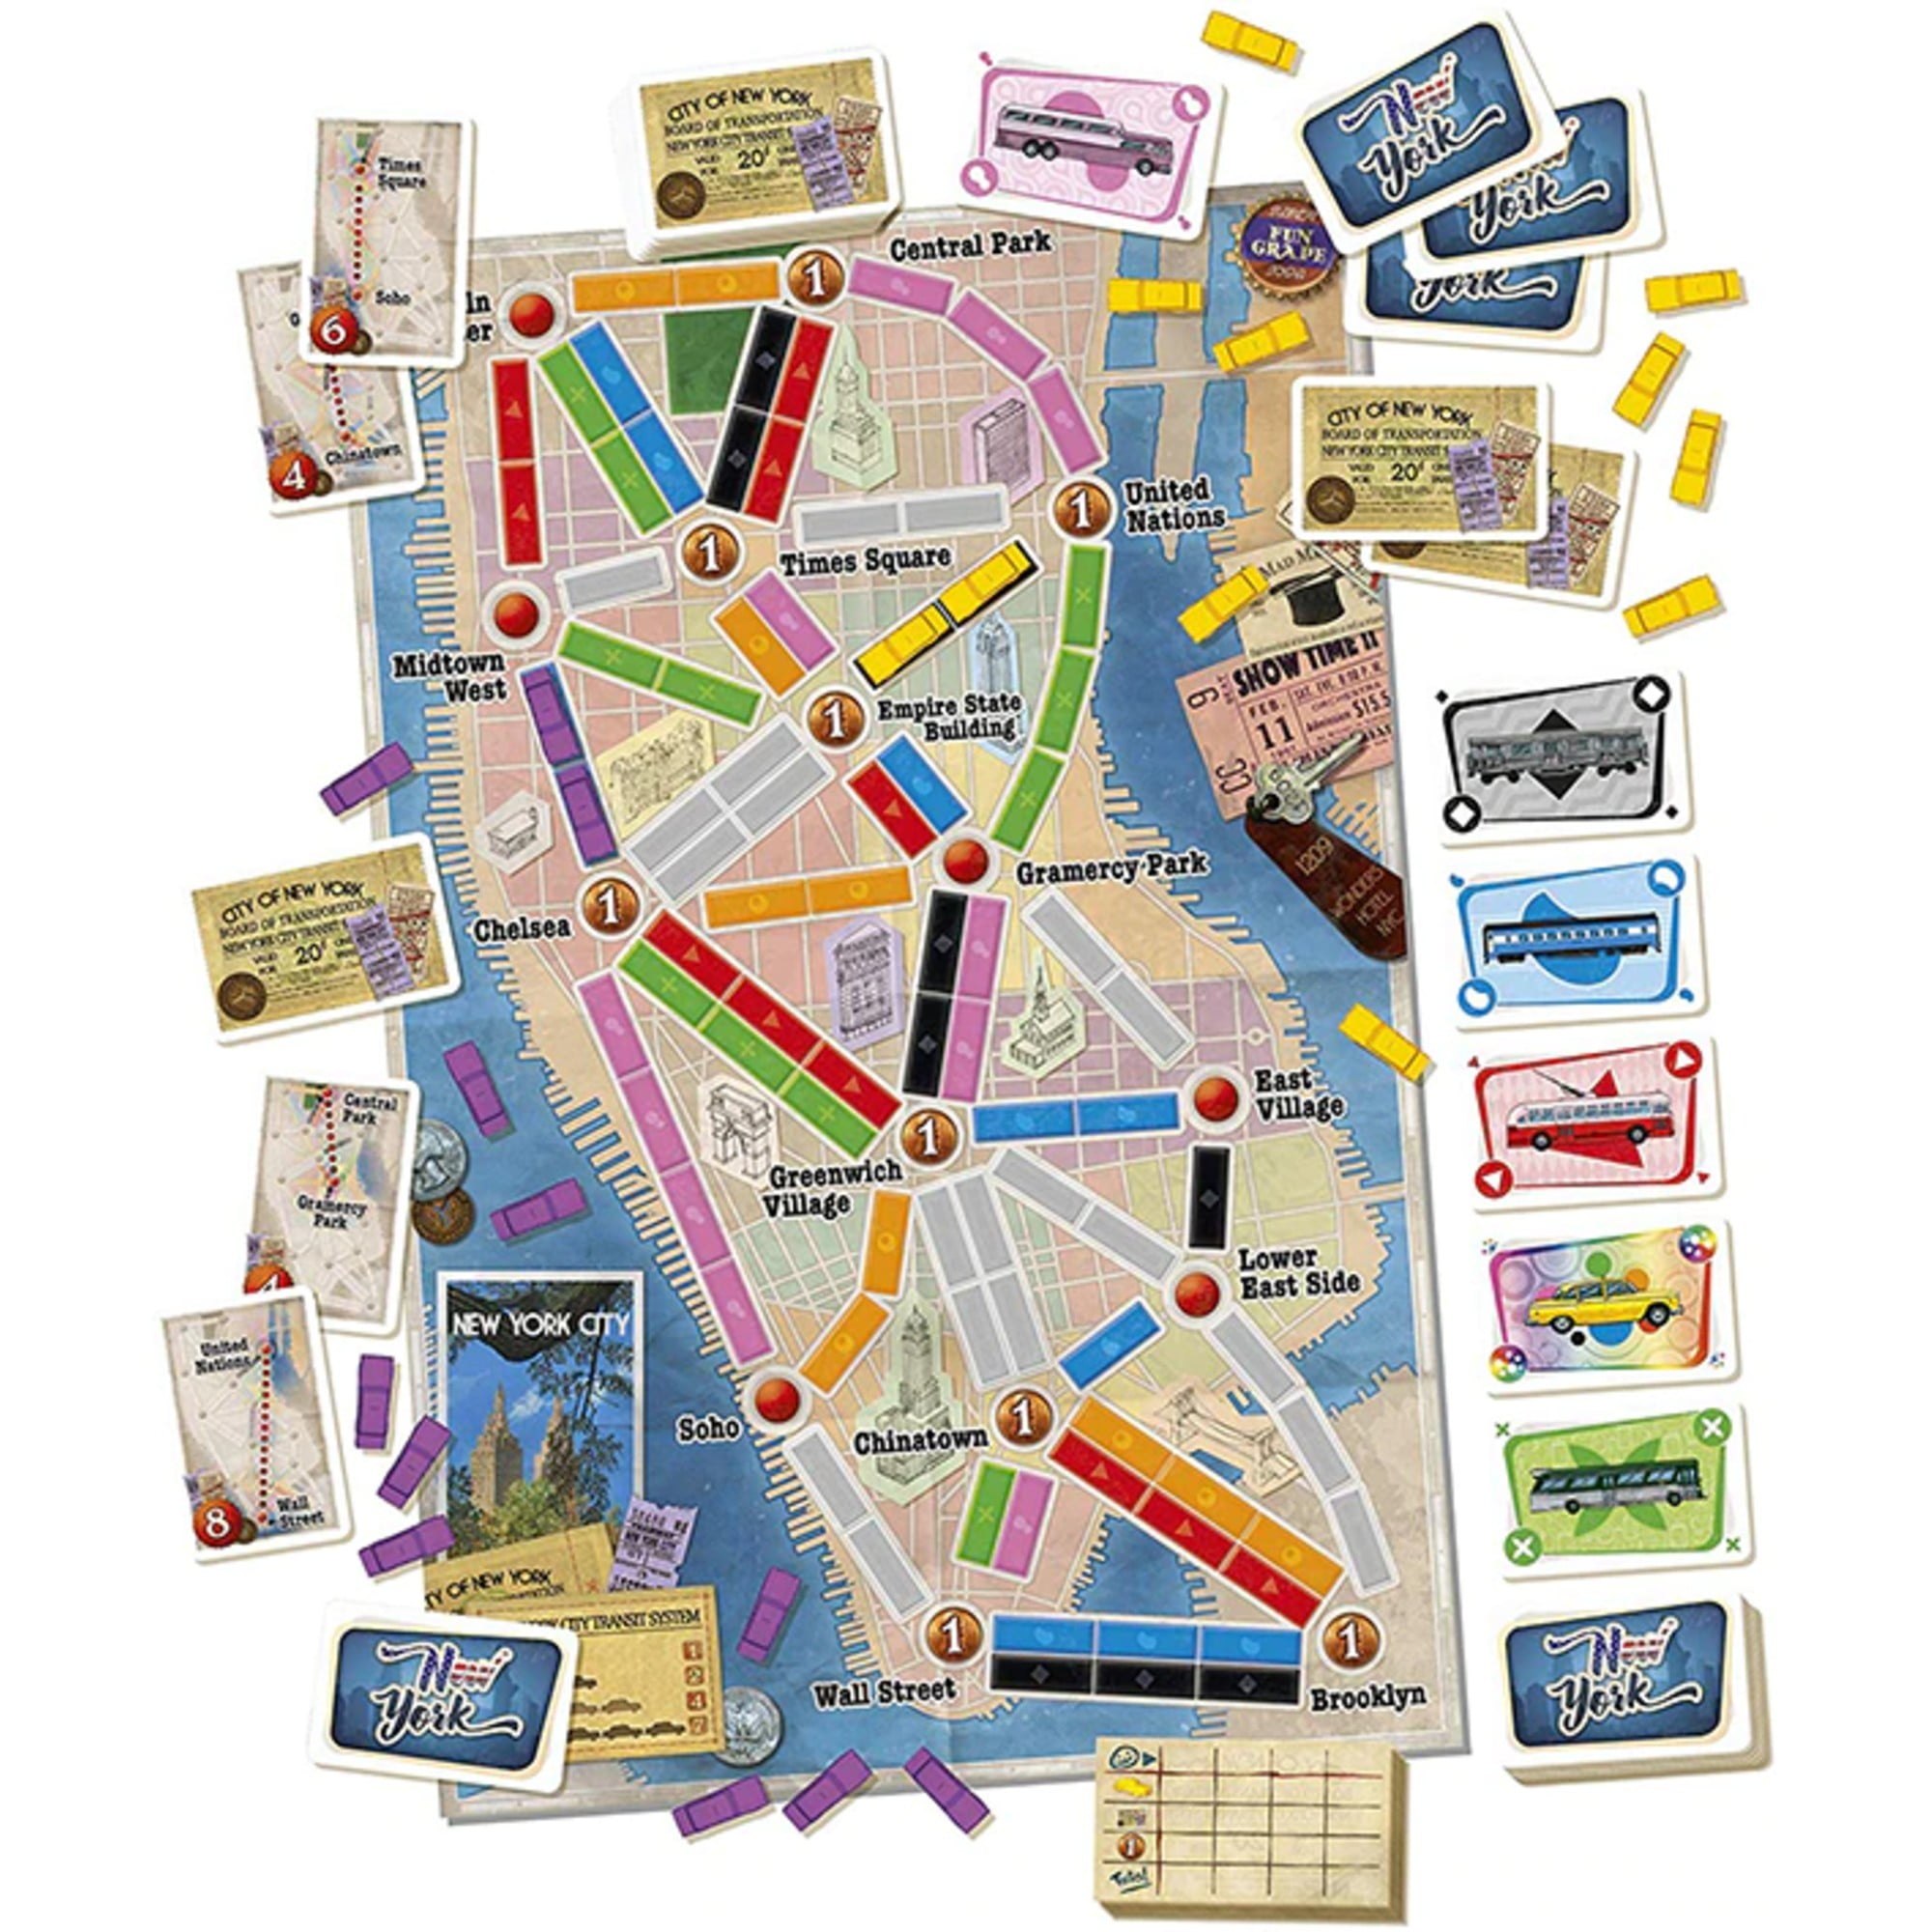 Ticket to ride new york